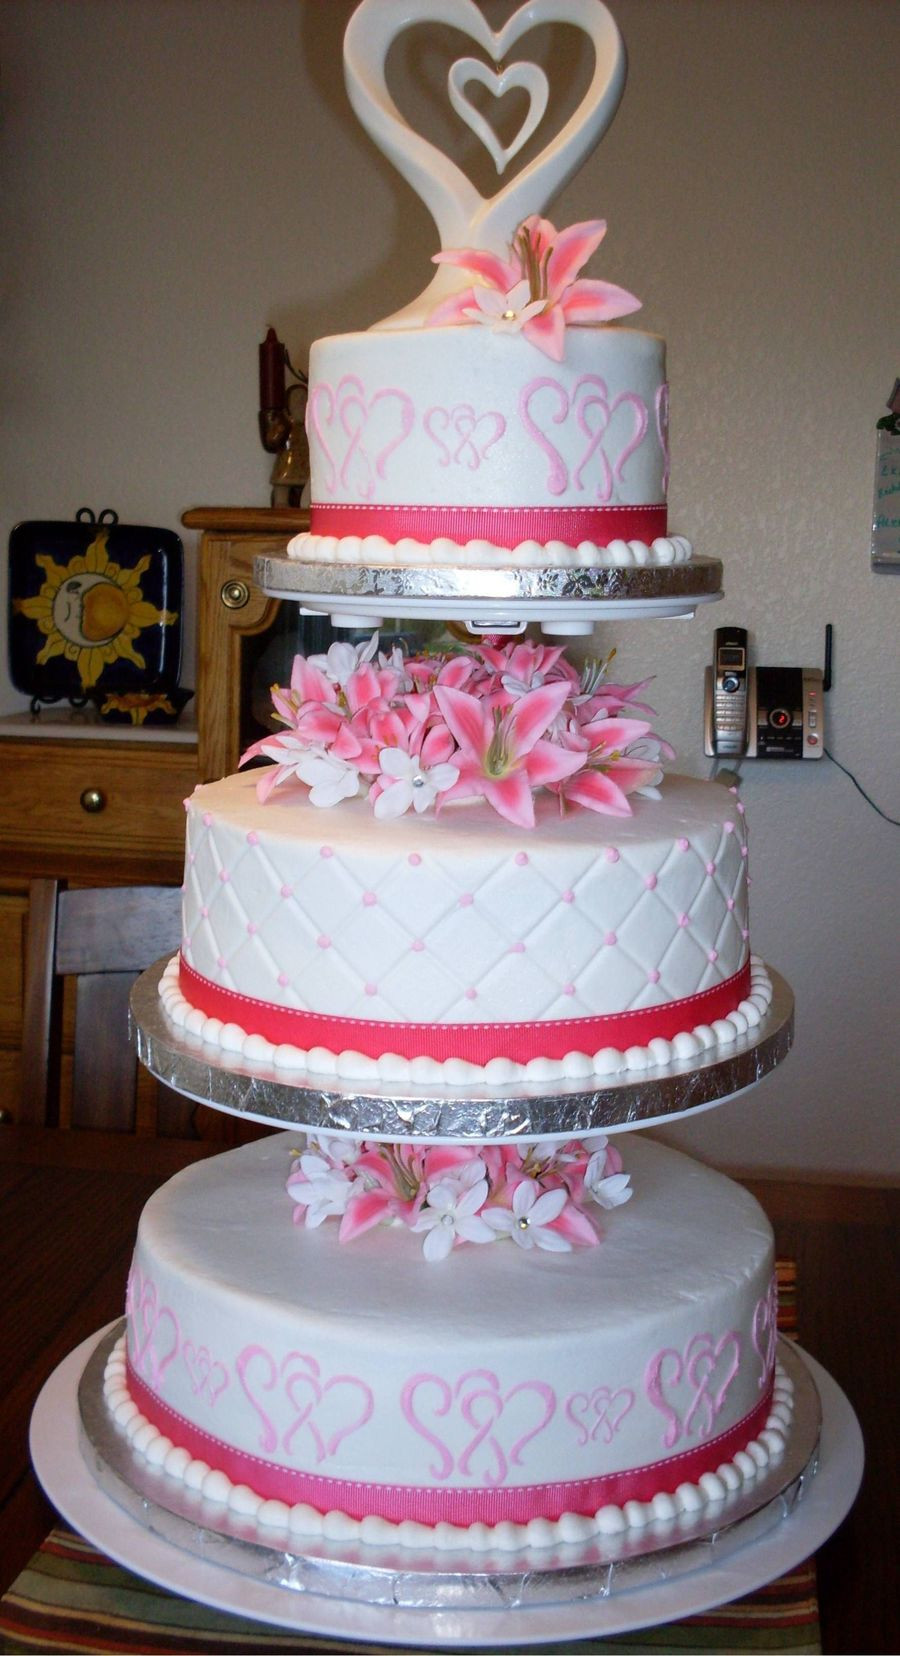 3 Tier Wedding Cakes Pictures
 Pink And White 3 Tier Wedding Cake CakeCentral